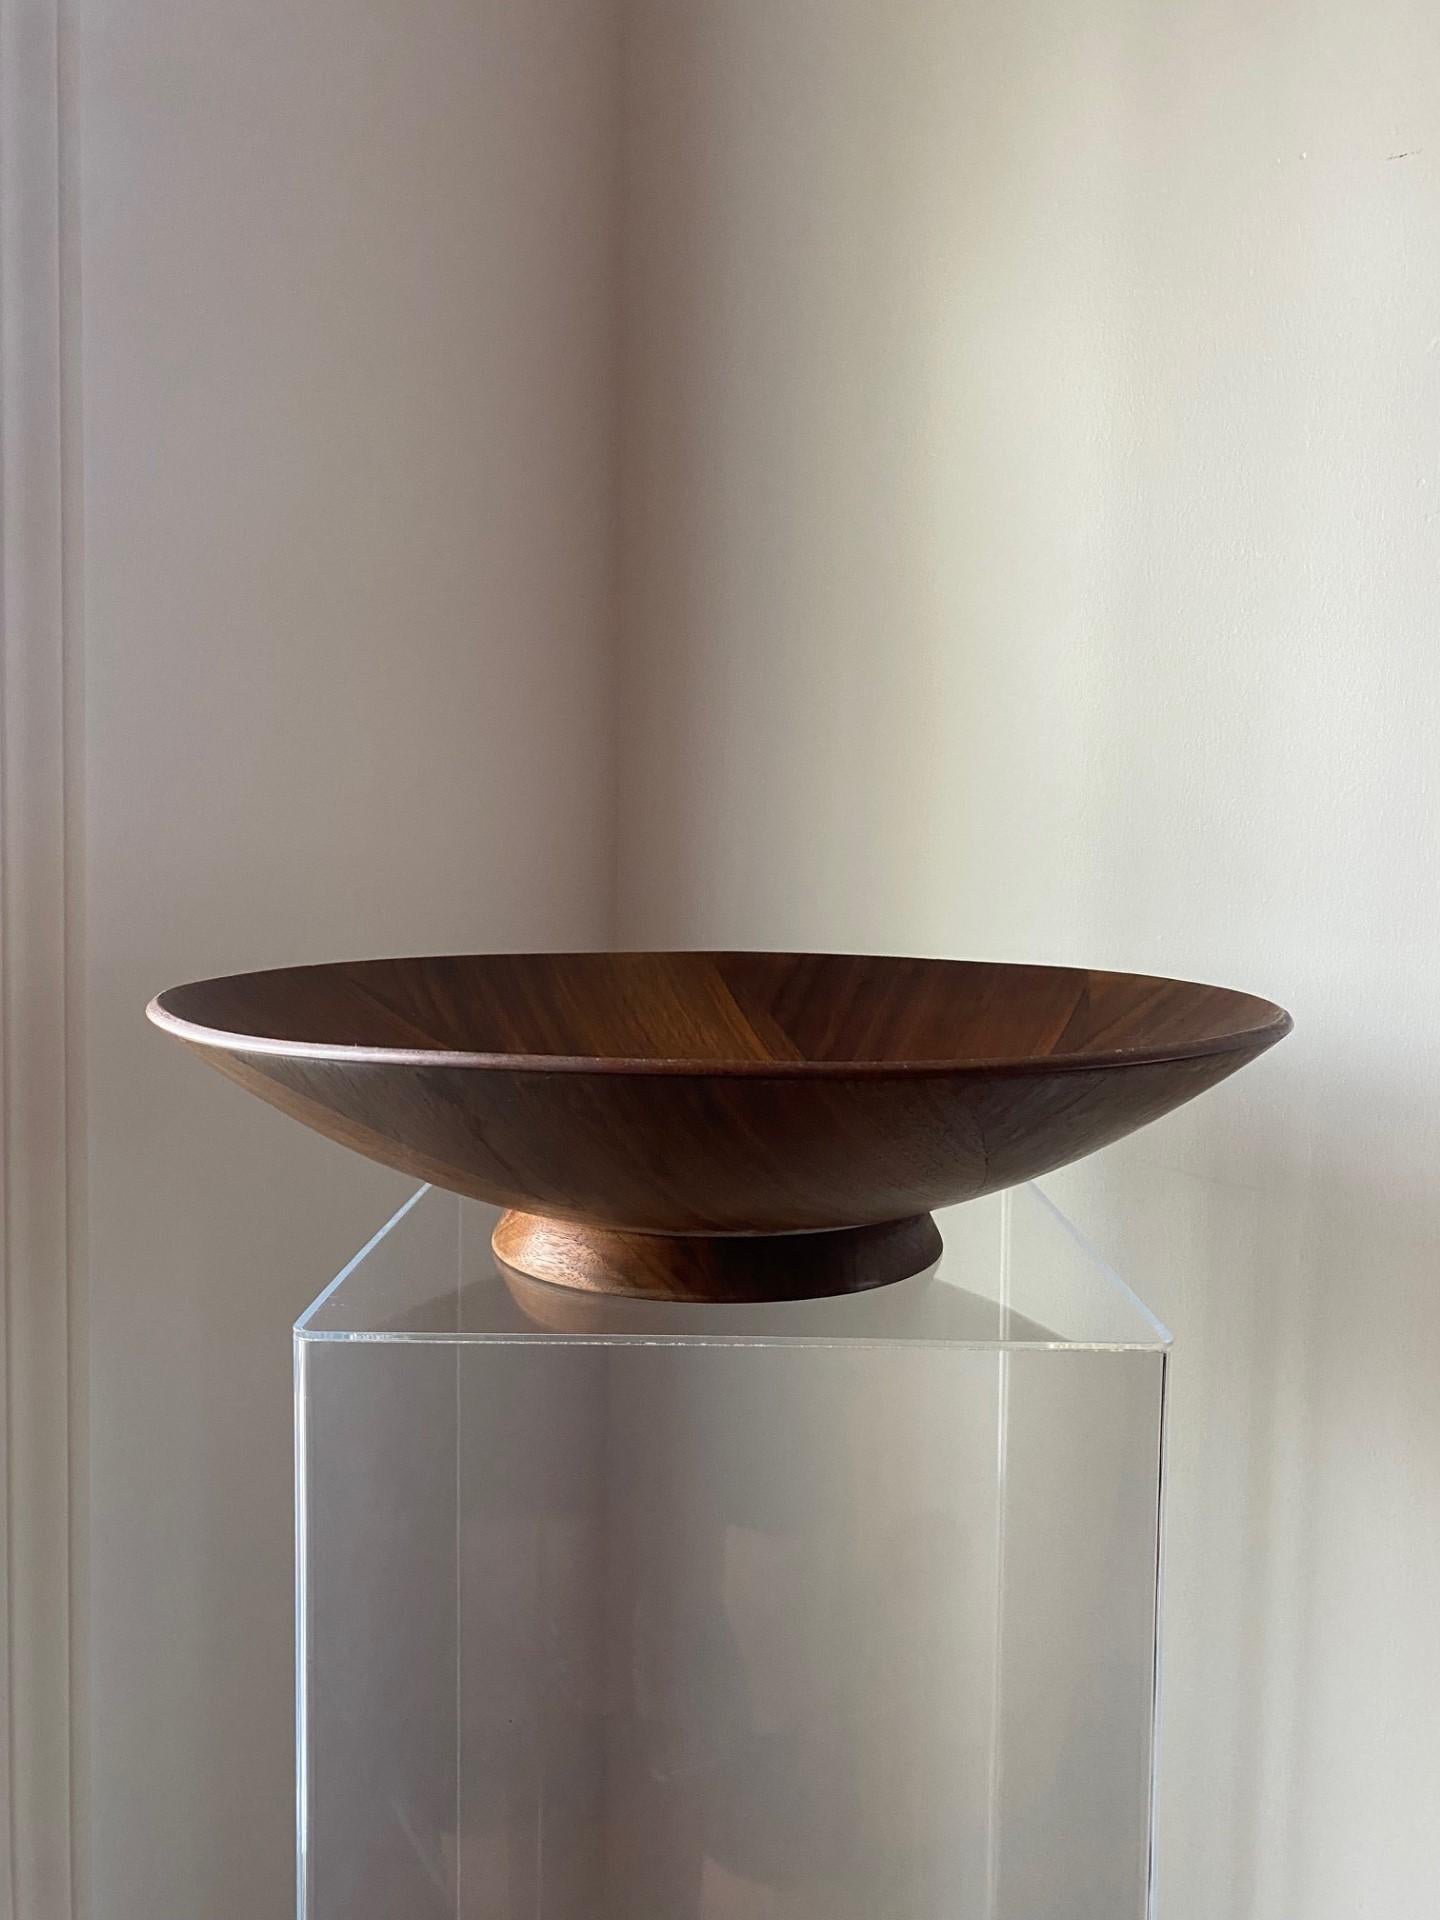 Beautiful serving bowl. Made in the USA and dating to the 1960s, this piece in an iris/aperture design with veneered inlays of teak on a walnut footed base is incredible. Organic and sculptural, the design is welcomed in any type of décor. There is